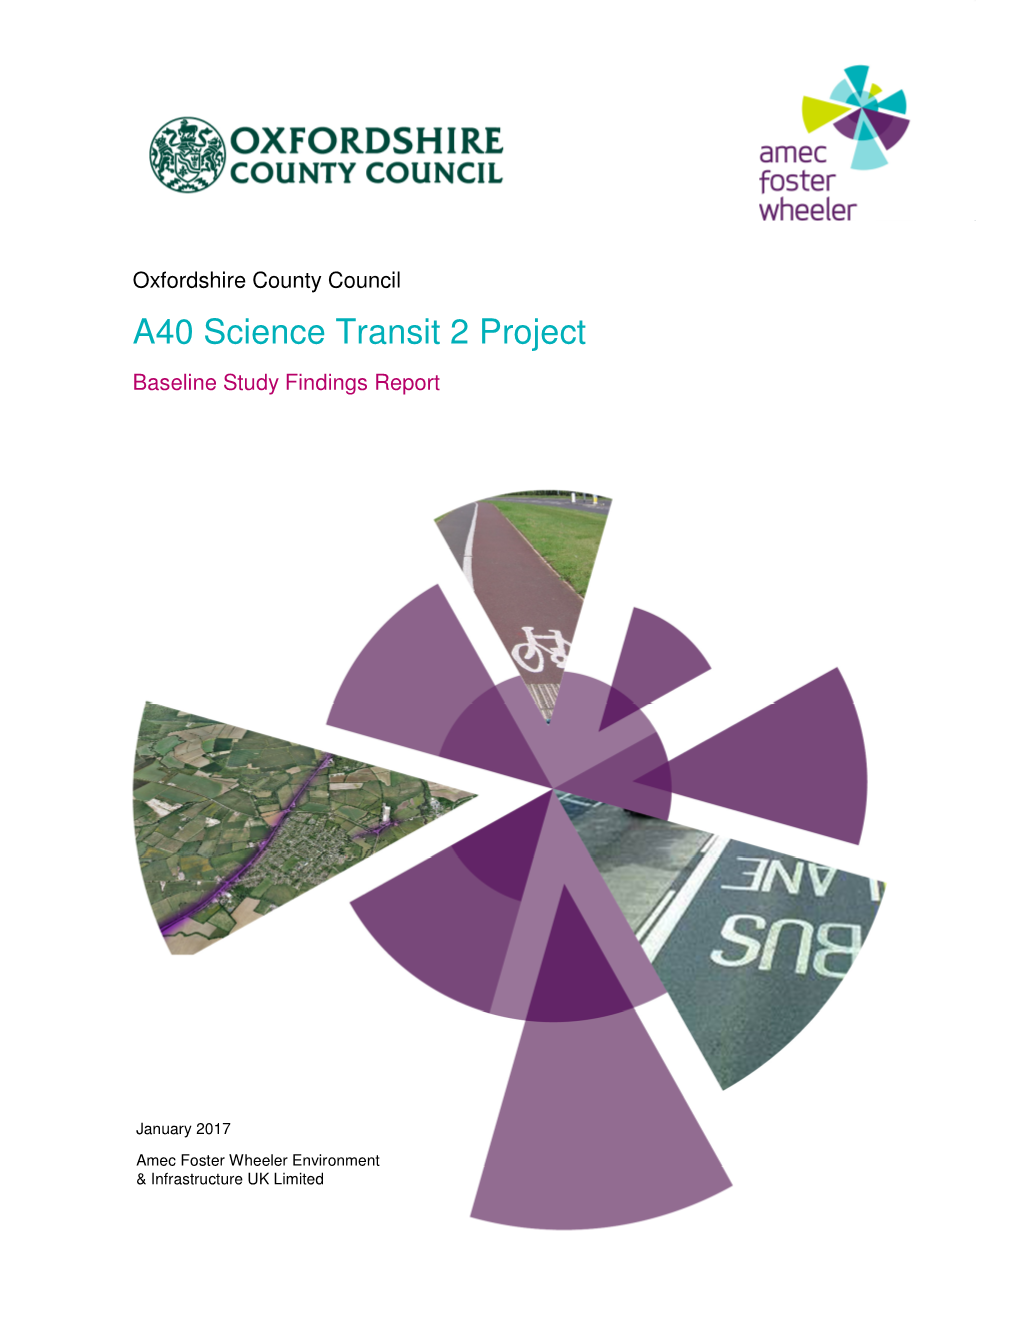 A40 Science Transit 2 Project Baseline Study Findings Report